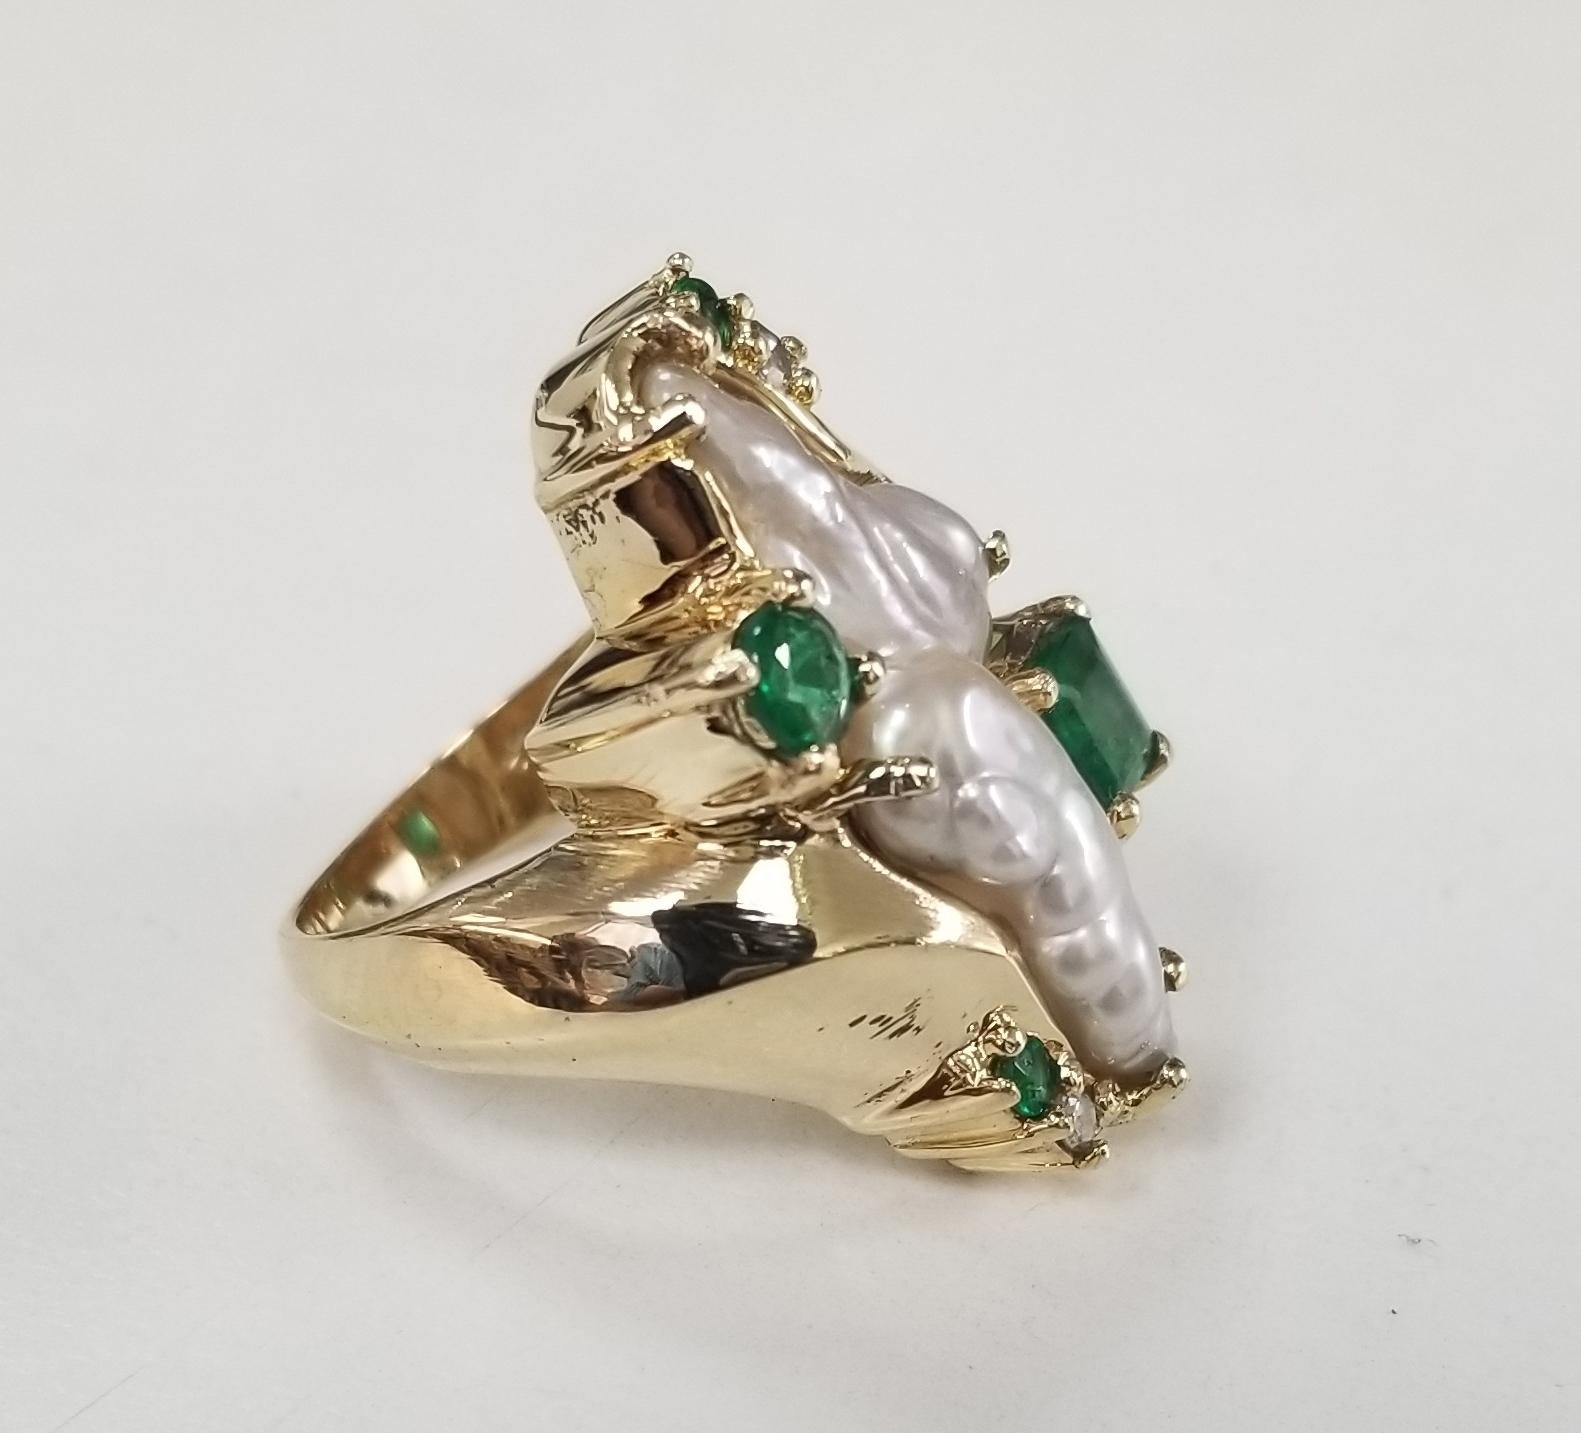 Item specifics
Condition:Pre-owned:
Seller Notes:“GREAT CONDITION”
Diamond Clarity Grade:Very Slightly Included (VS1)
Setting Style:cocktail
Type:Ring
Main Stone Color:Emerald ec .47, round .23, 2 .08
Metal Purity:14k
Main Stone: 2 Diamonds .08
Main